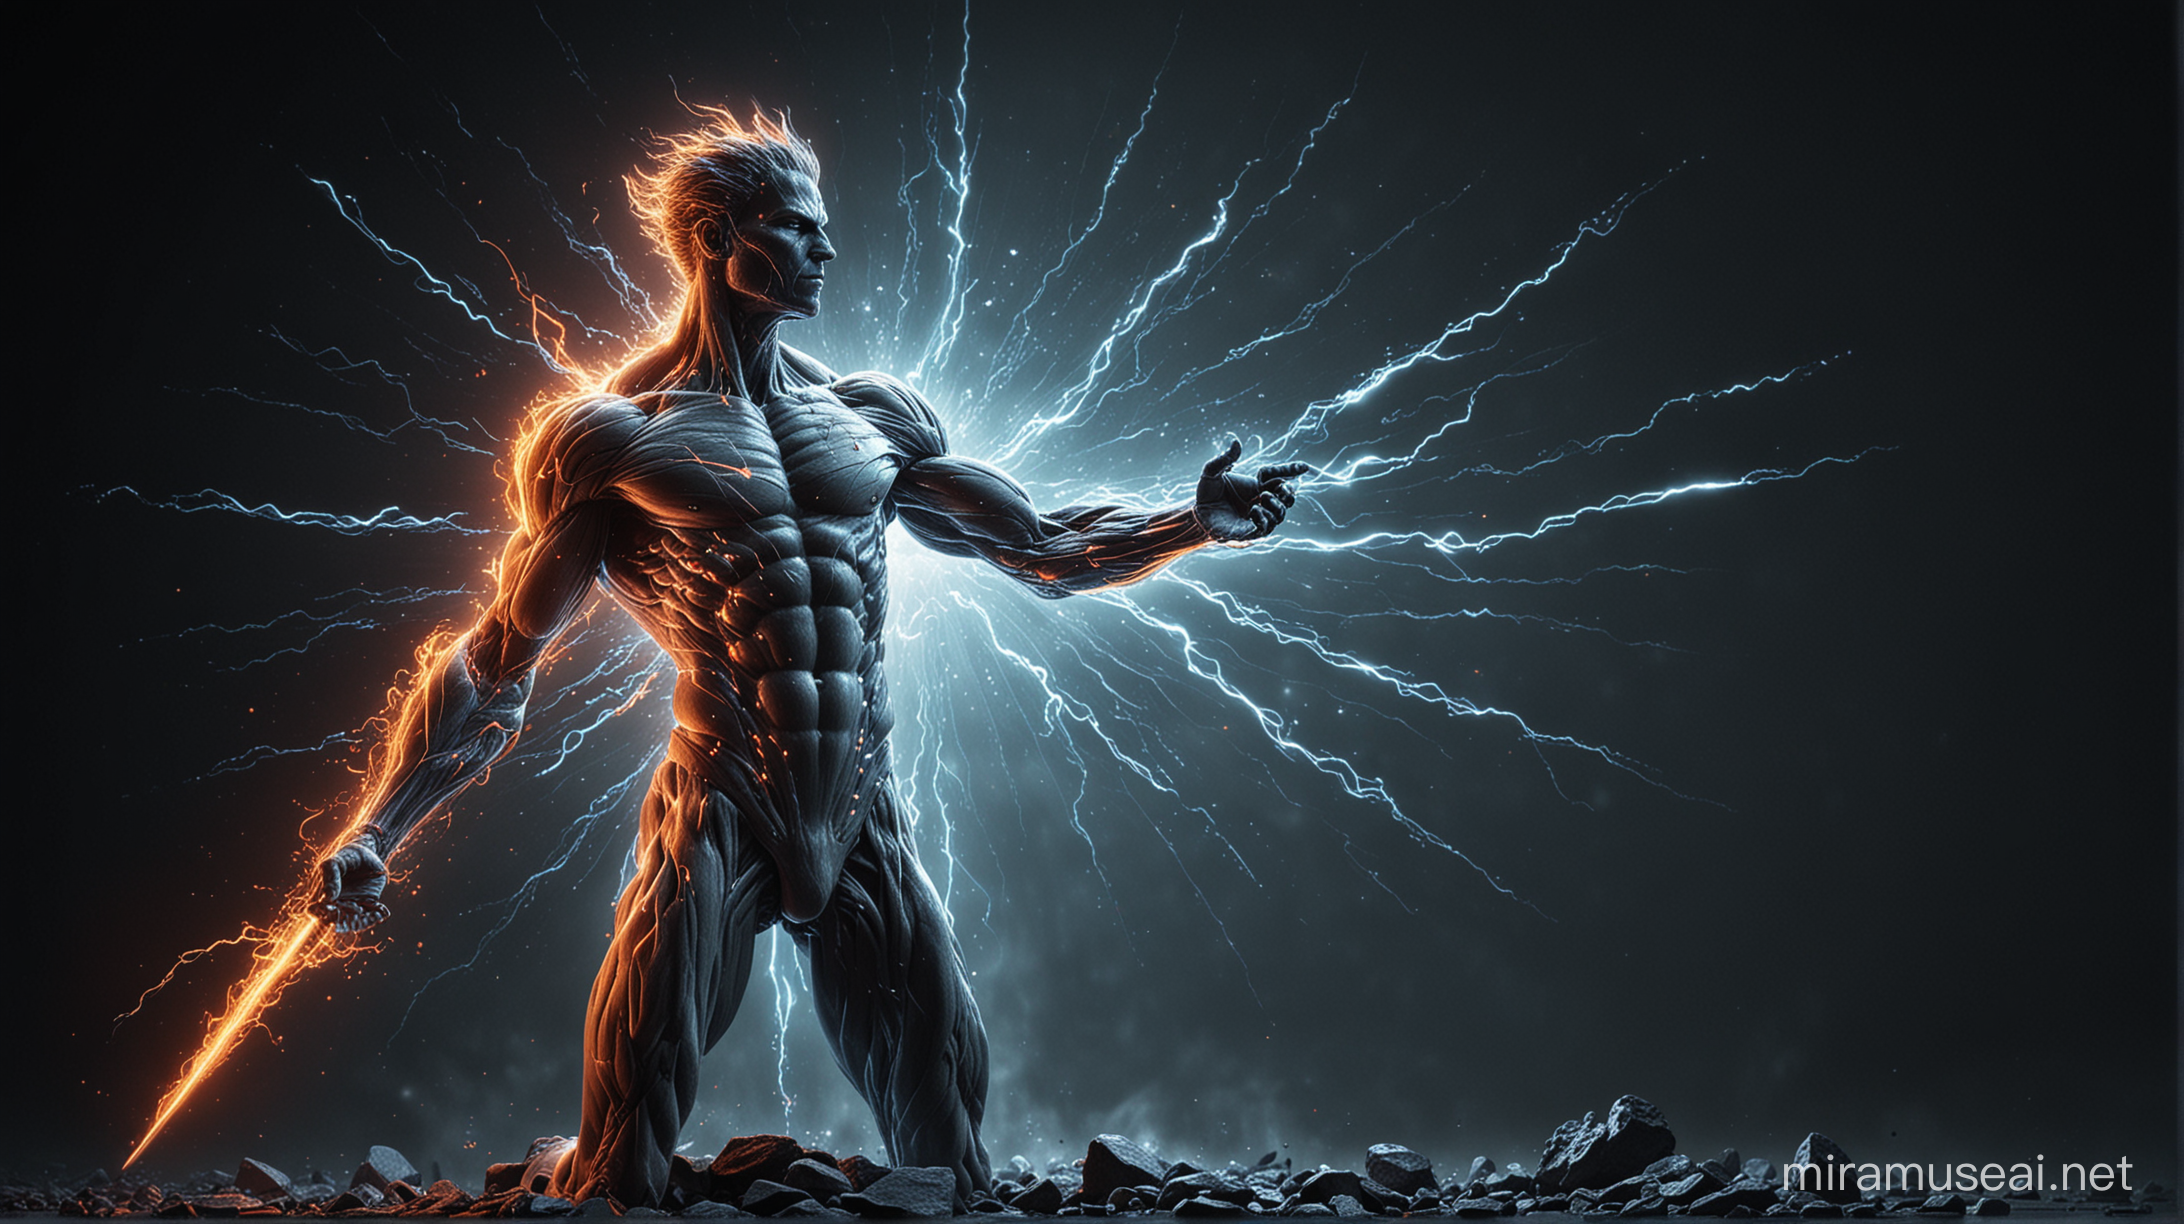 Display visuals of energy pulsating or glowing around a warrior's body, illustrating the concept of life force.